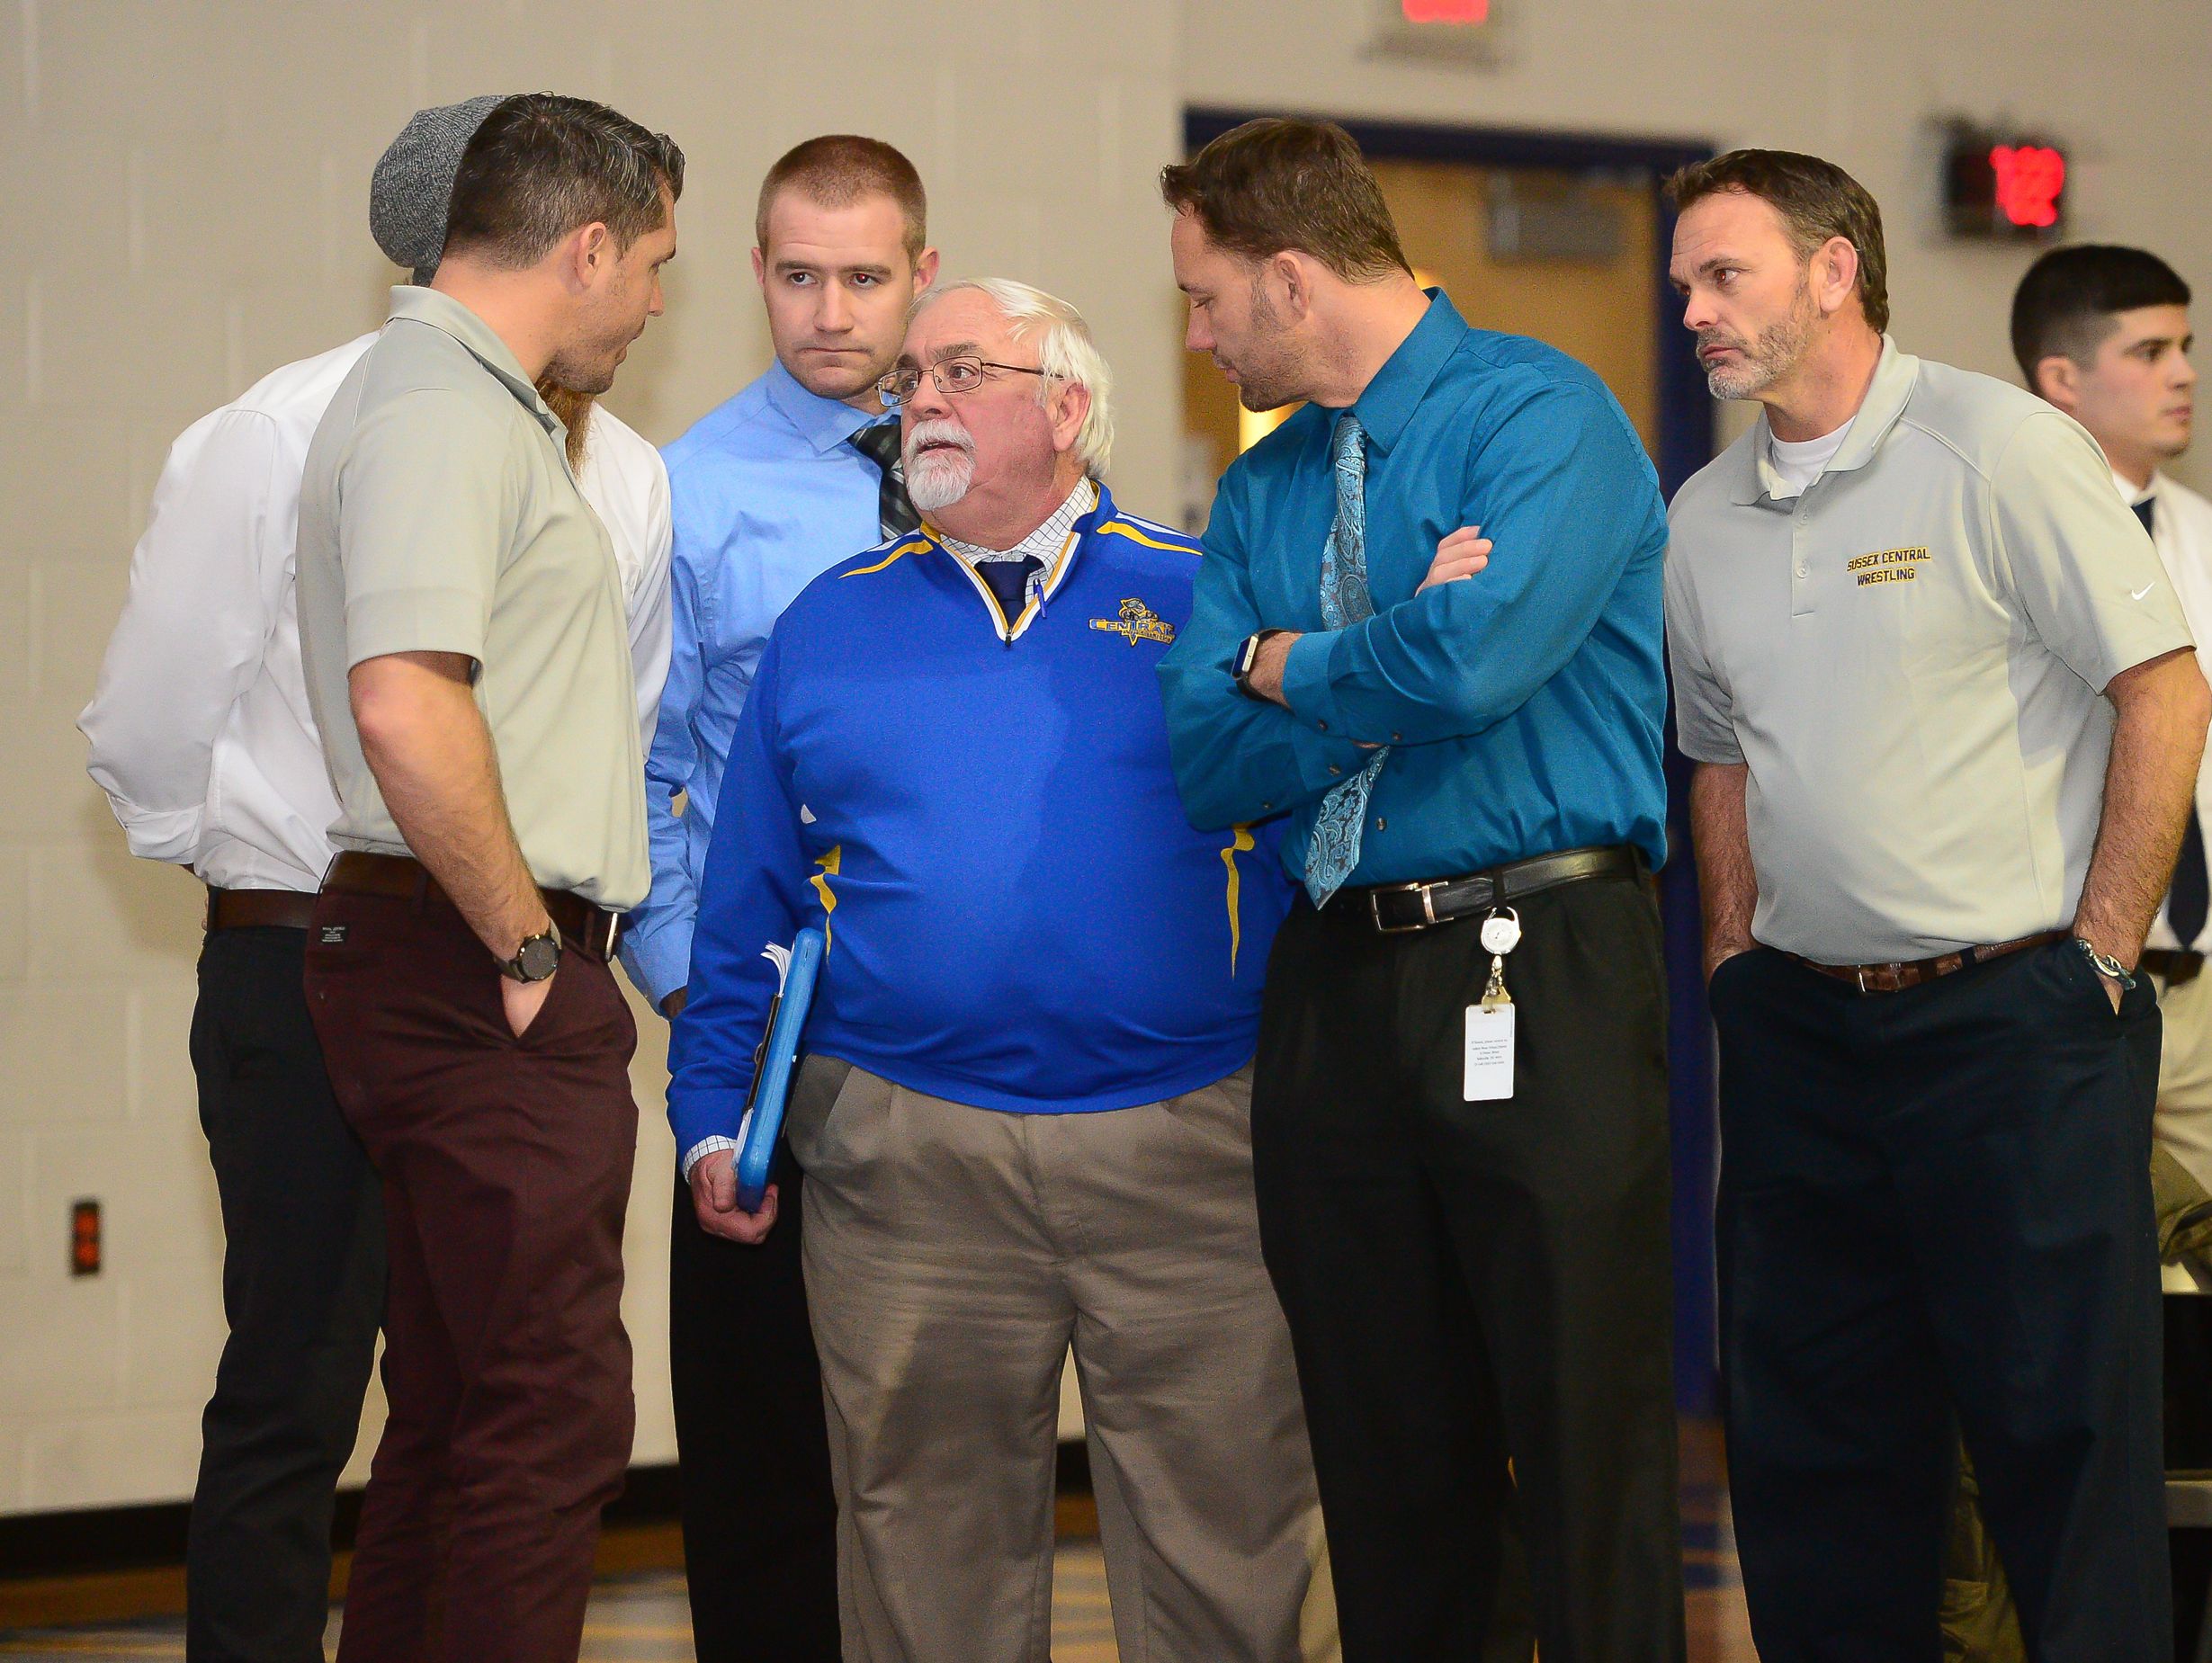 Sussex Central's head Coach Phil Shultie (middle) talks to his assistant coaches during the match up against Poltech on Wednesday, Feb. 2, 2017.